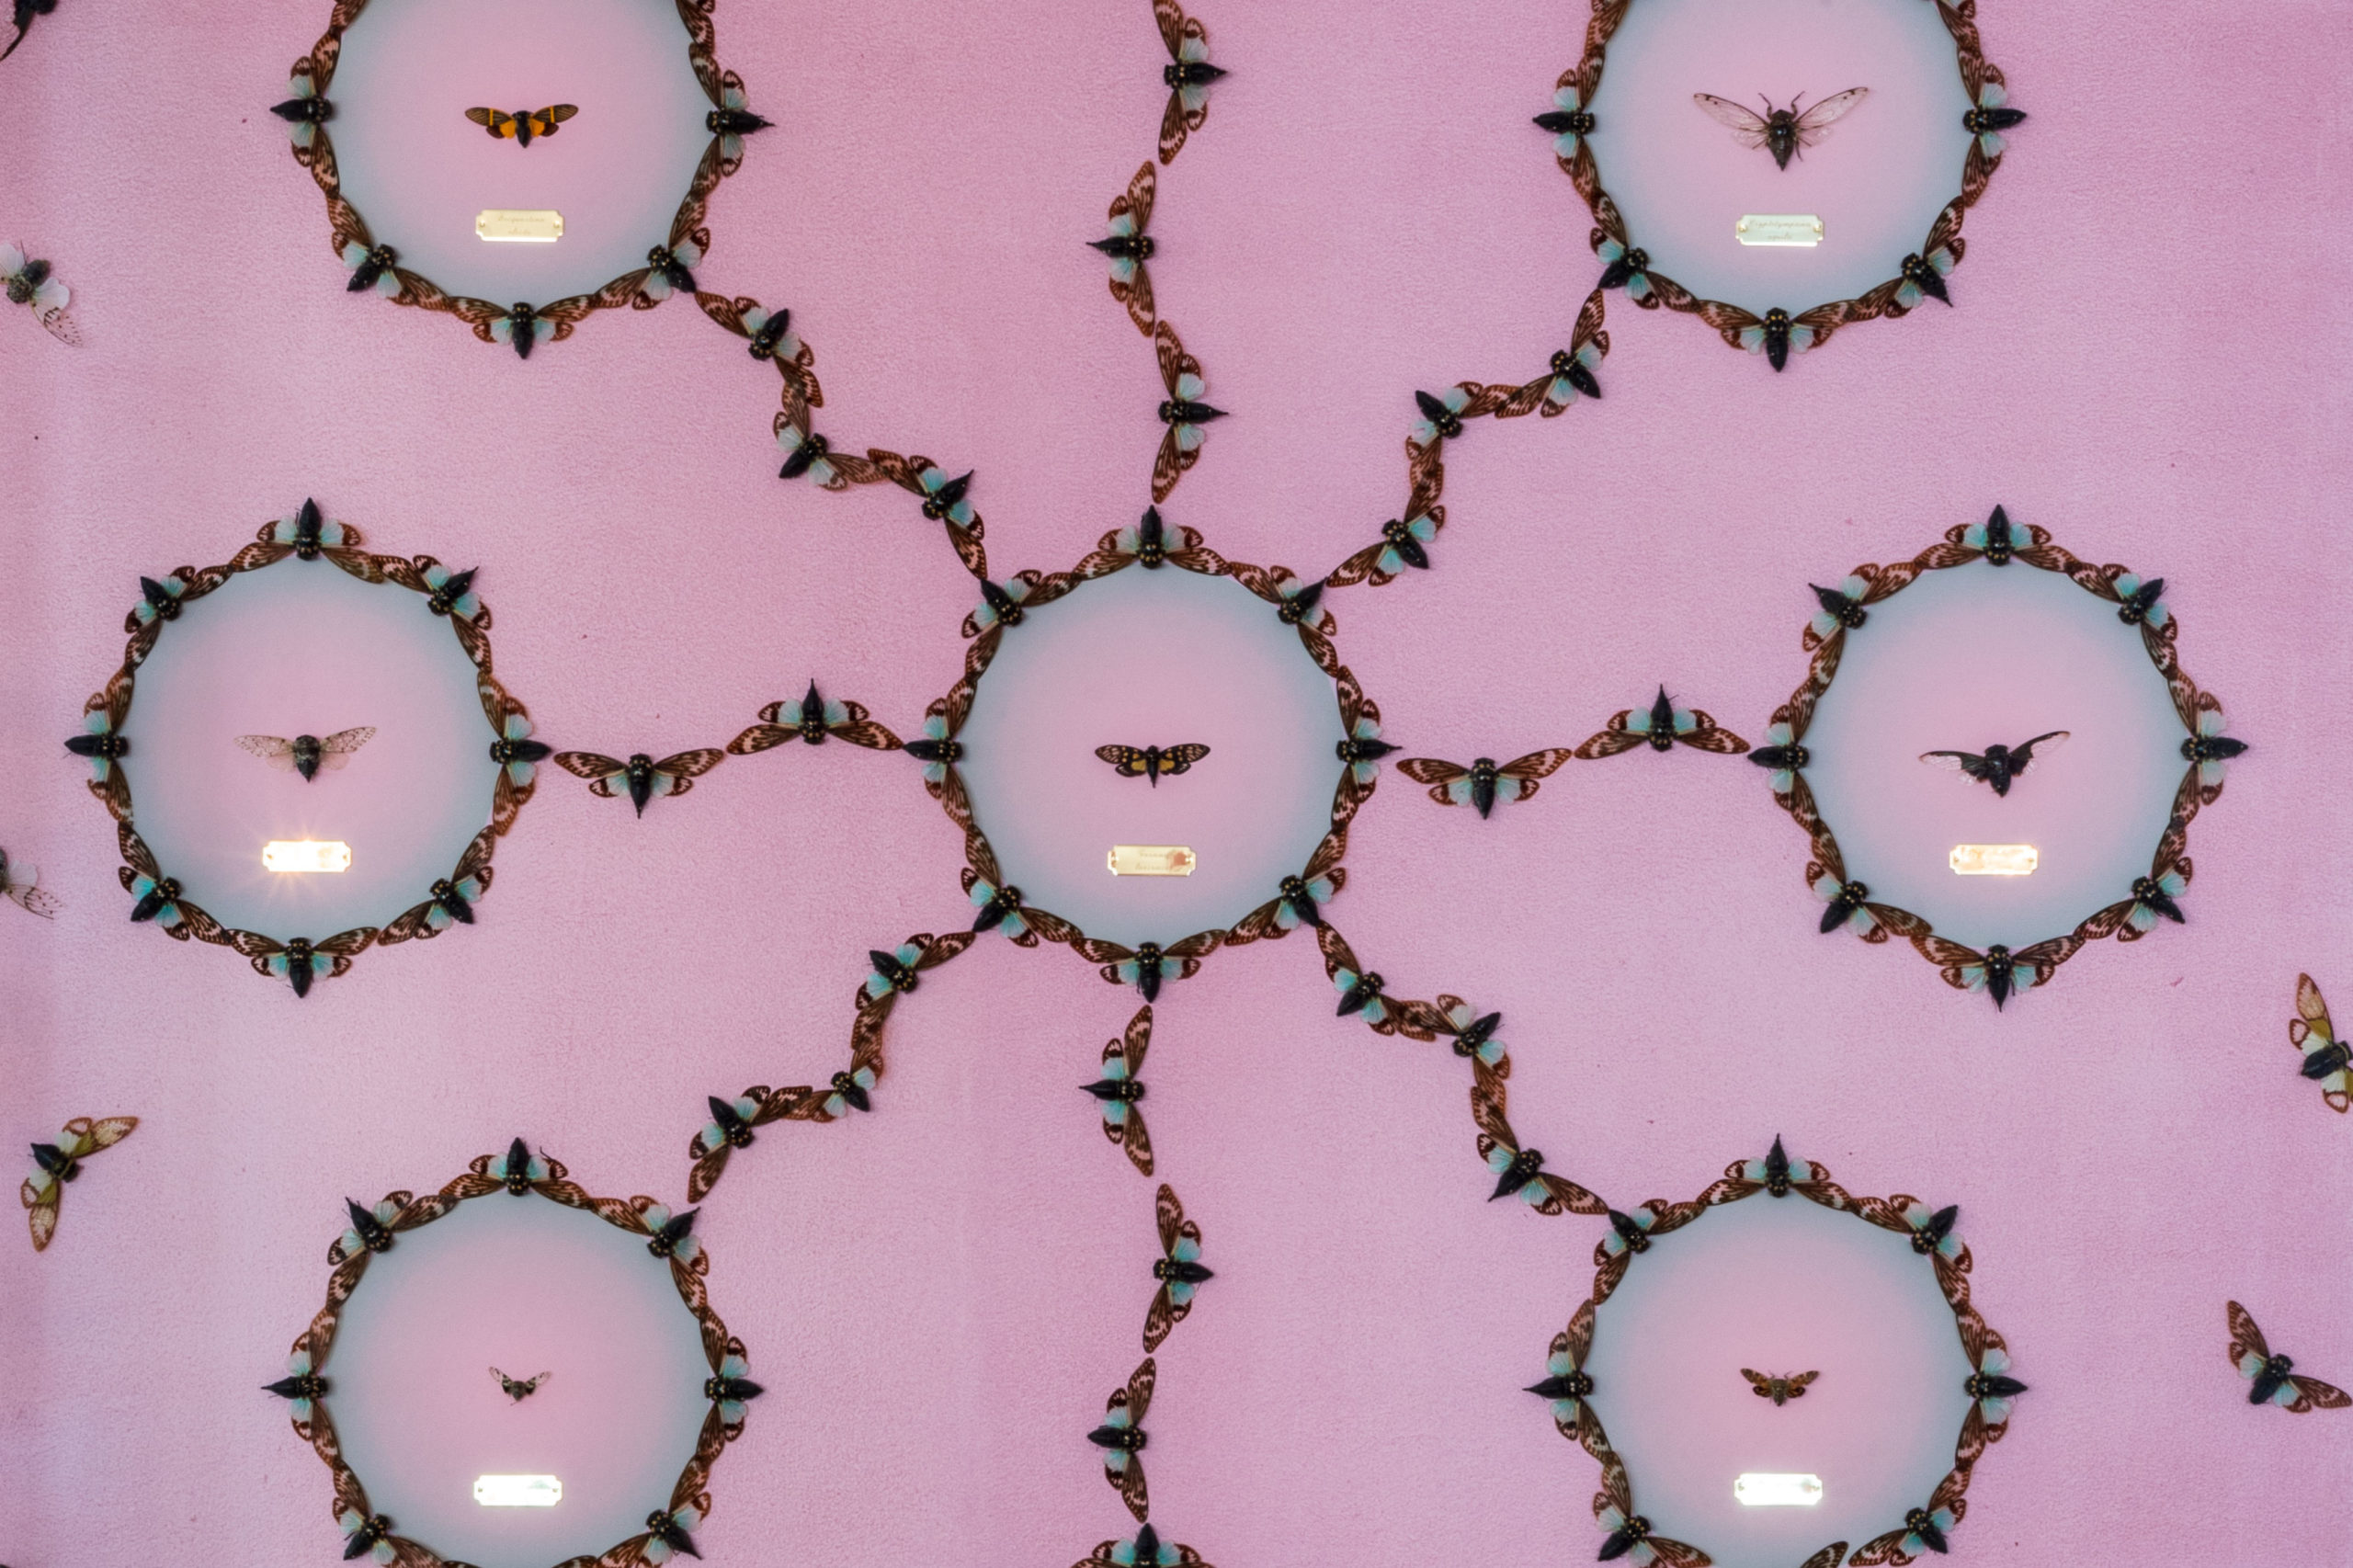 Geometric patterns made by pinning cicadas to a pink wall